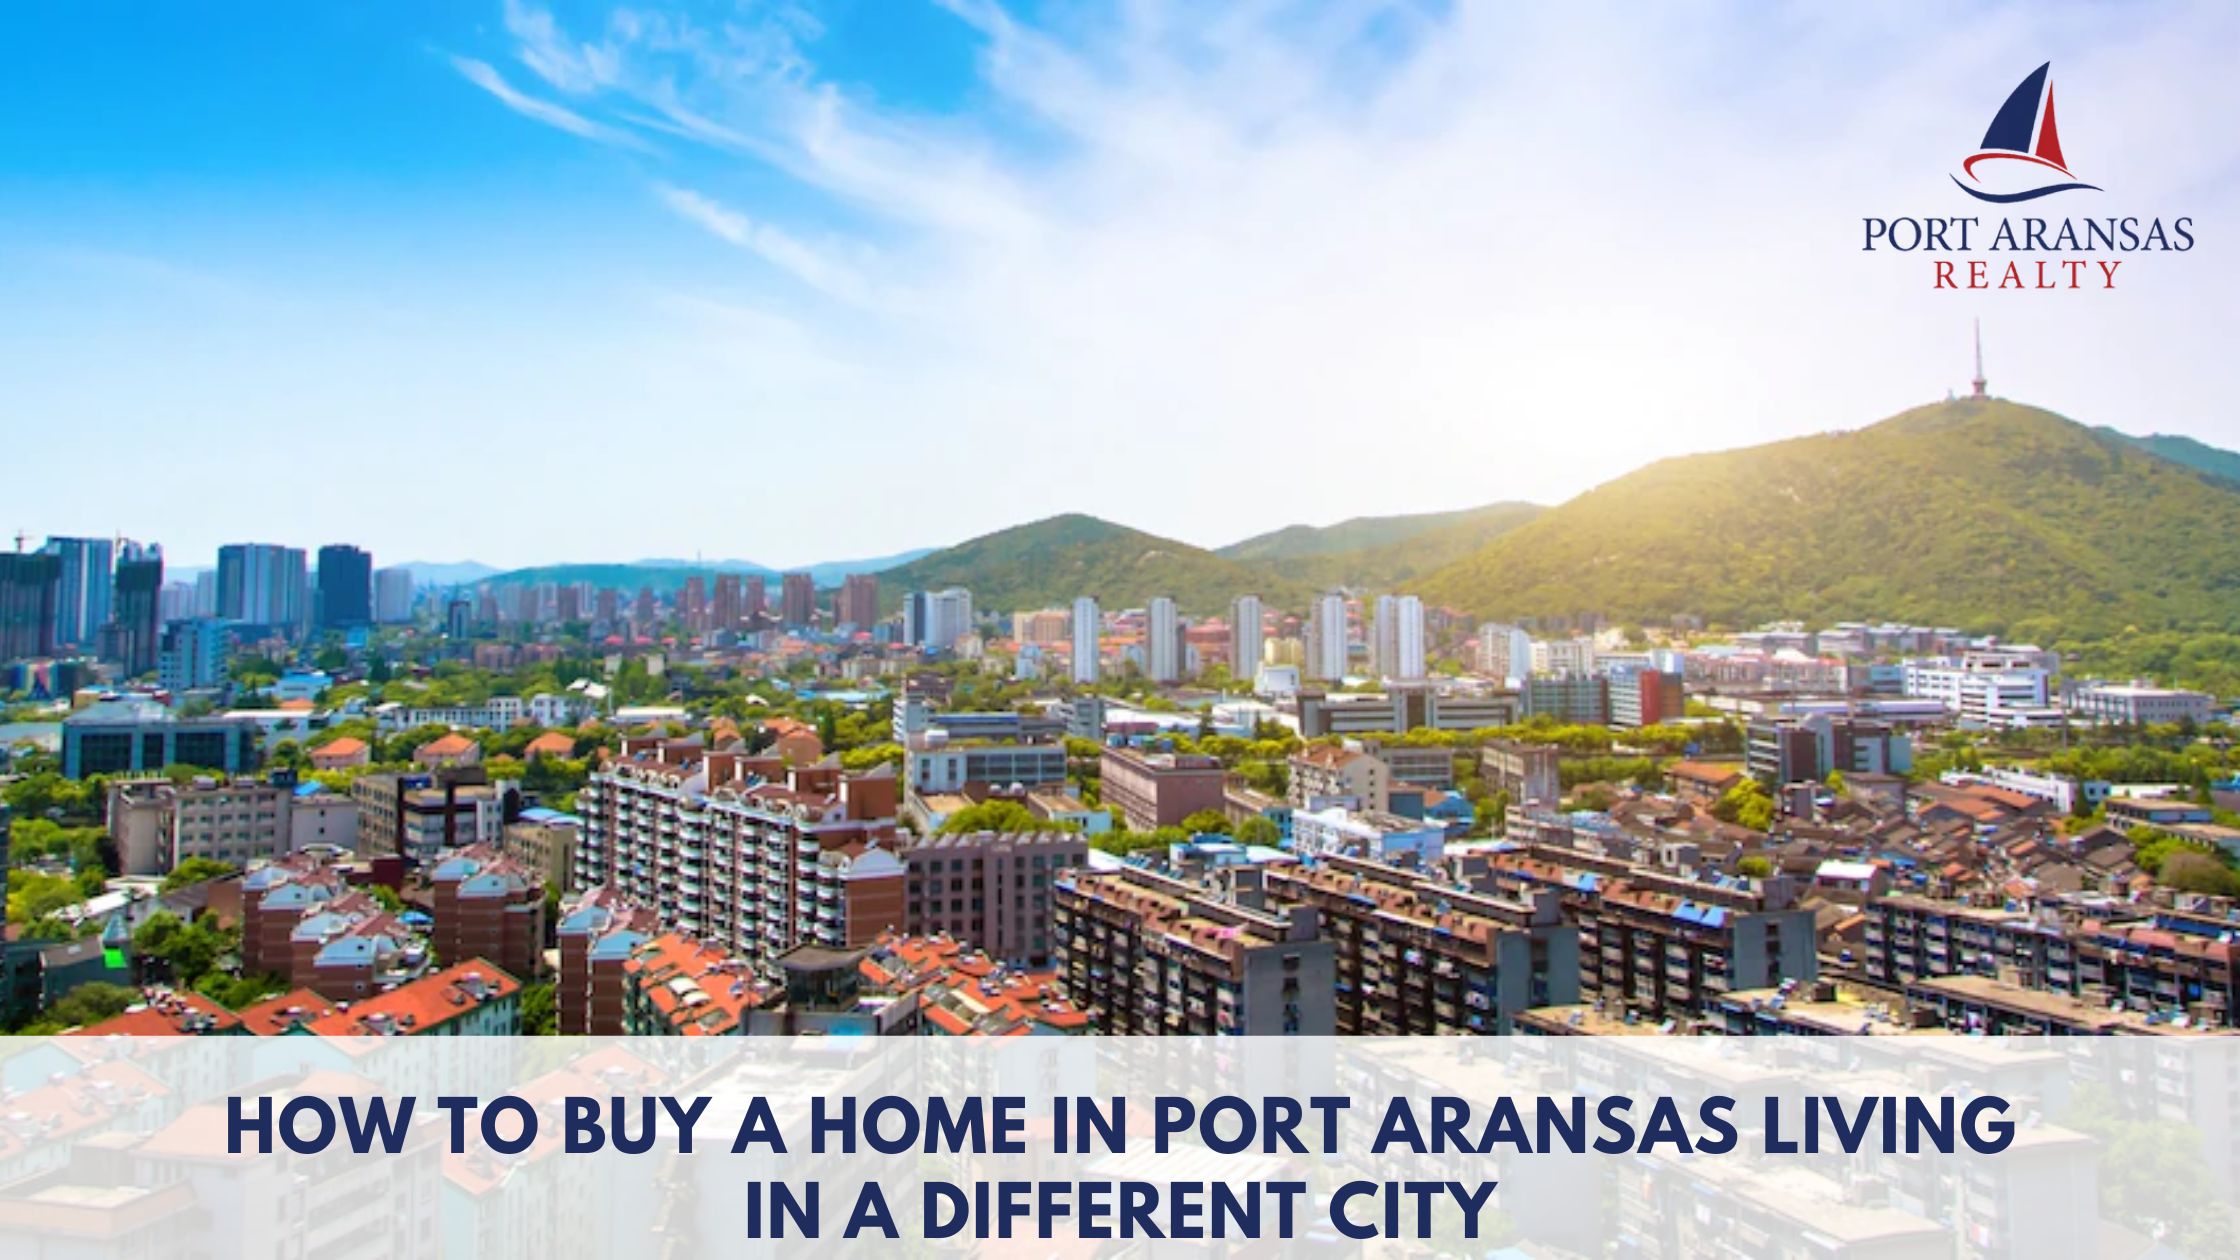 How to Buy a Home in Port Aransas Living in a Different City